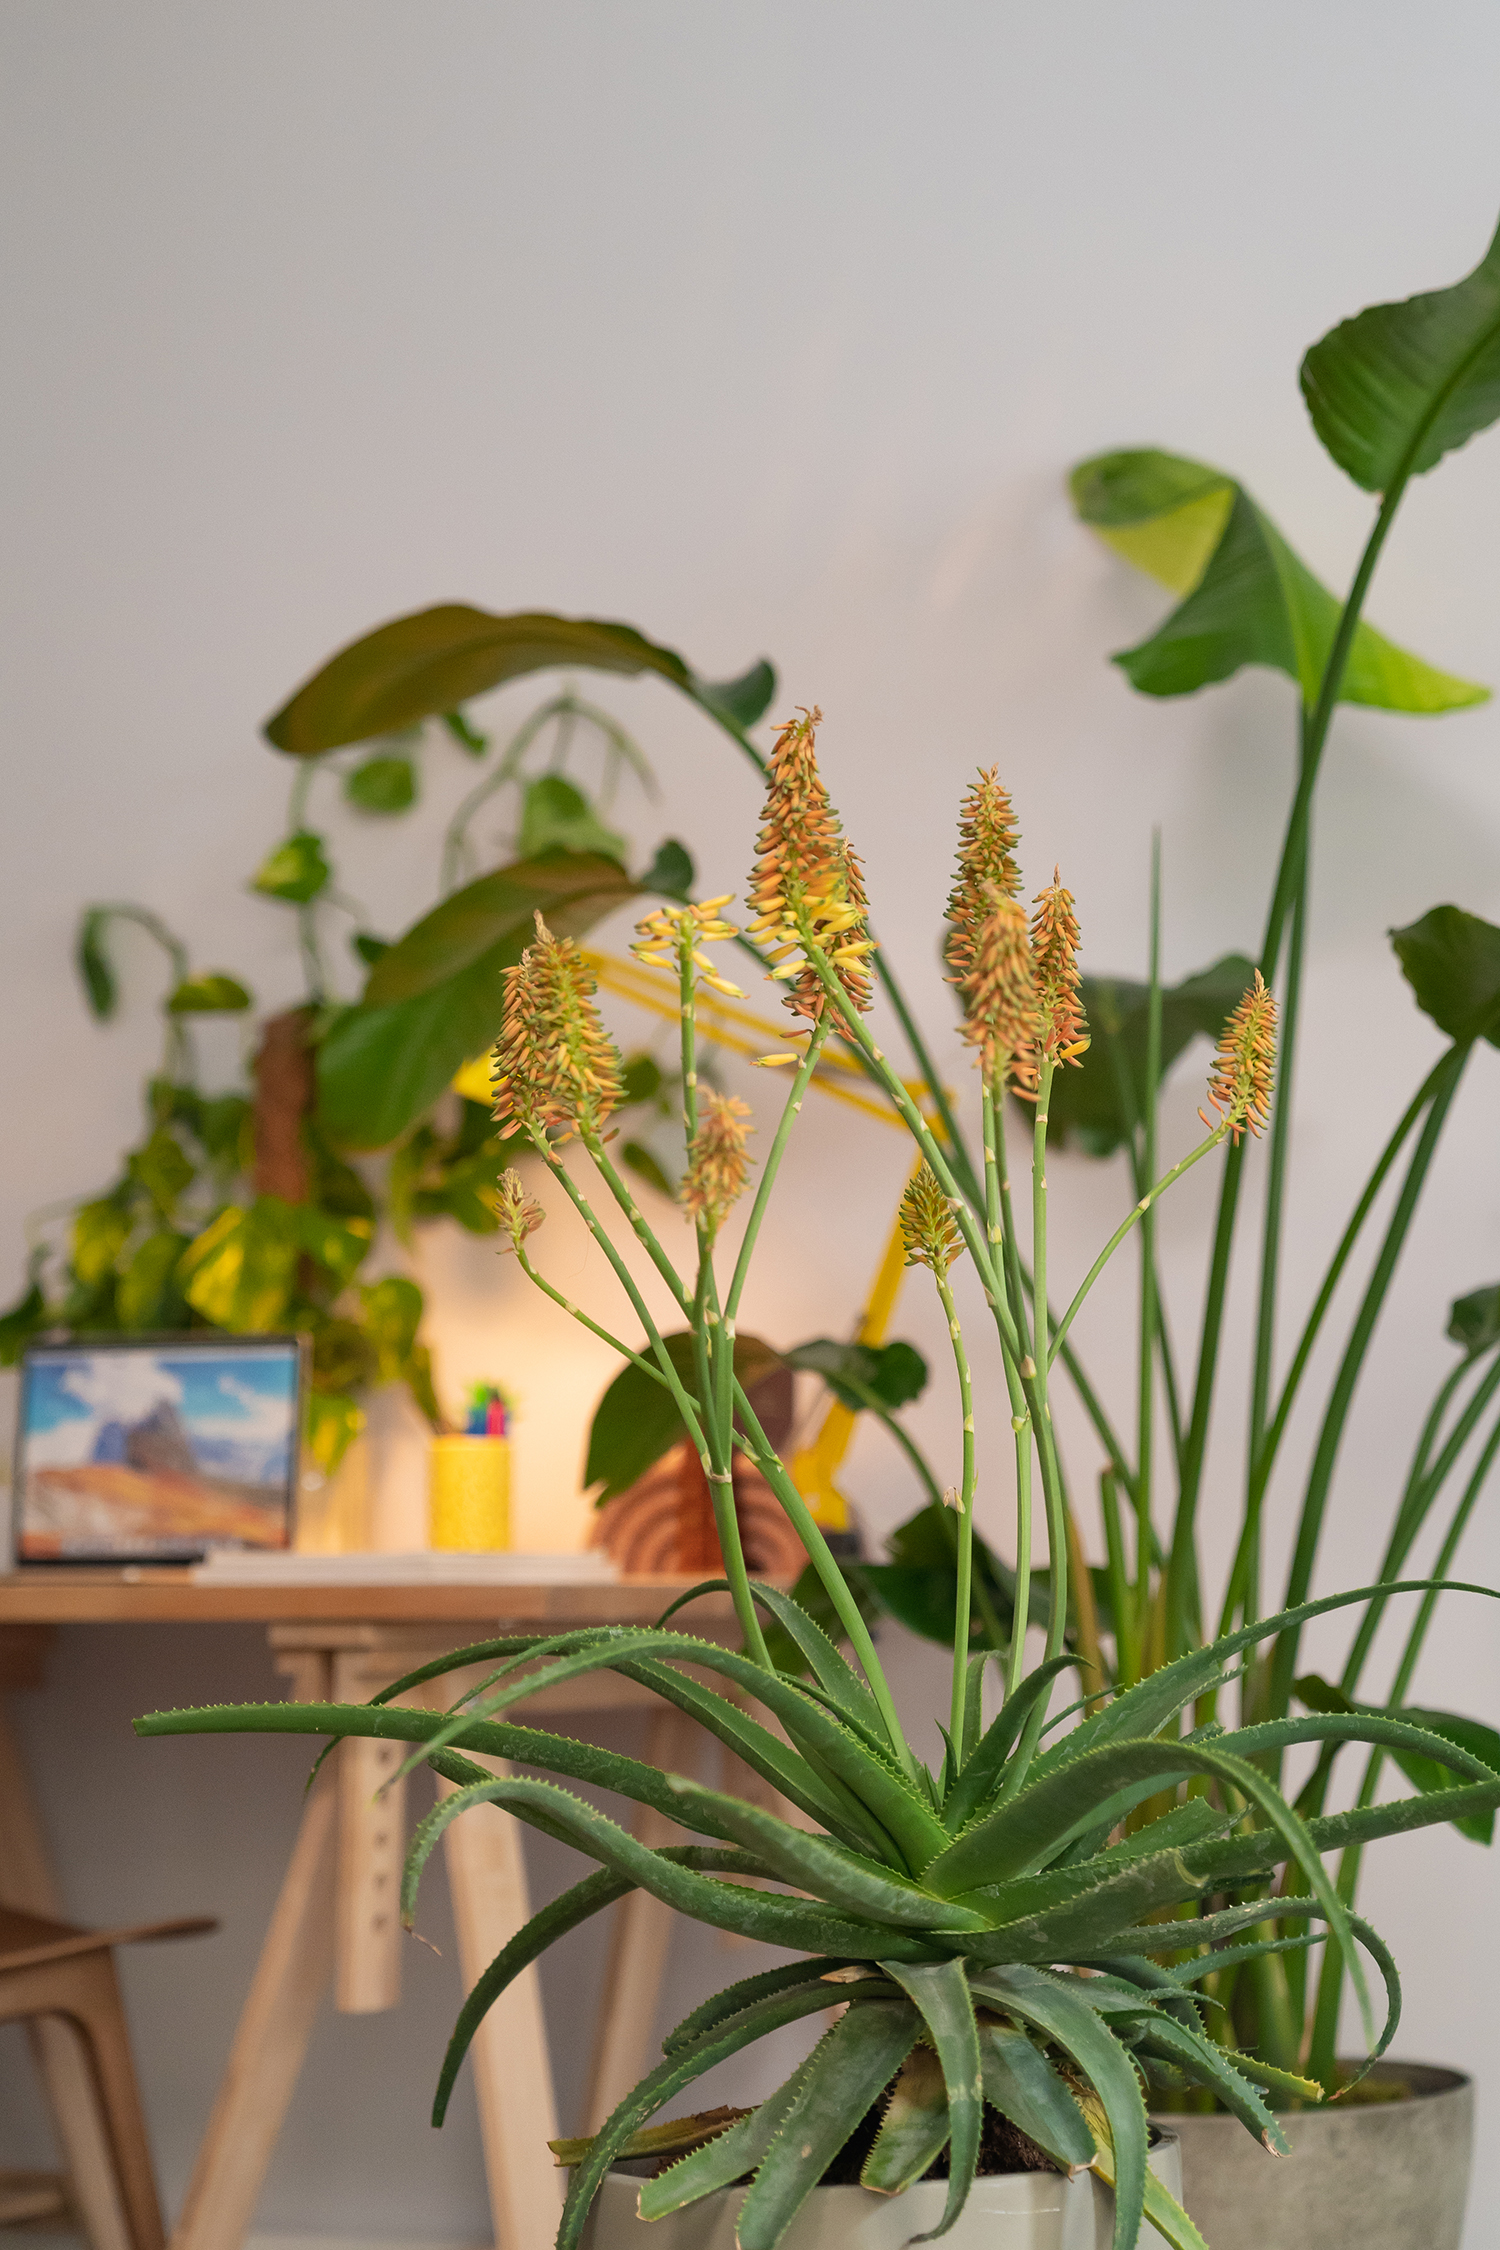 Urban Jungle Bloggers - Domestika online course Home Styling and Decoration with Plants